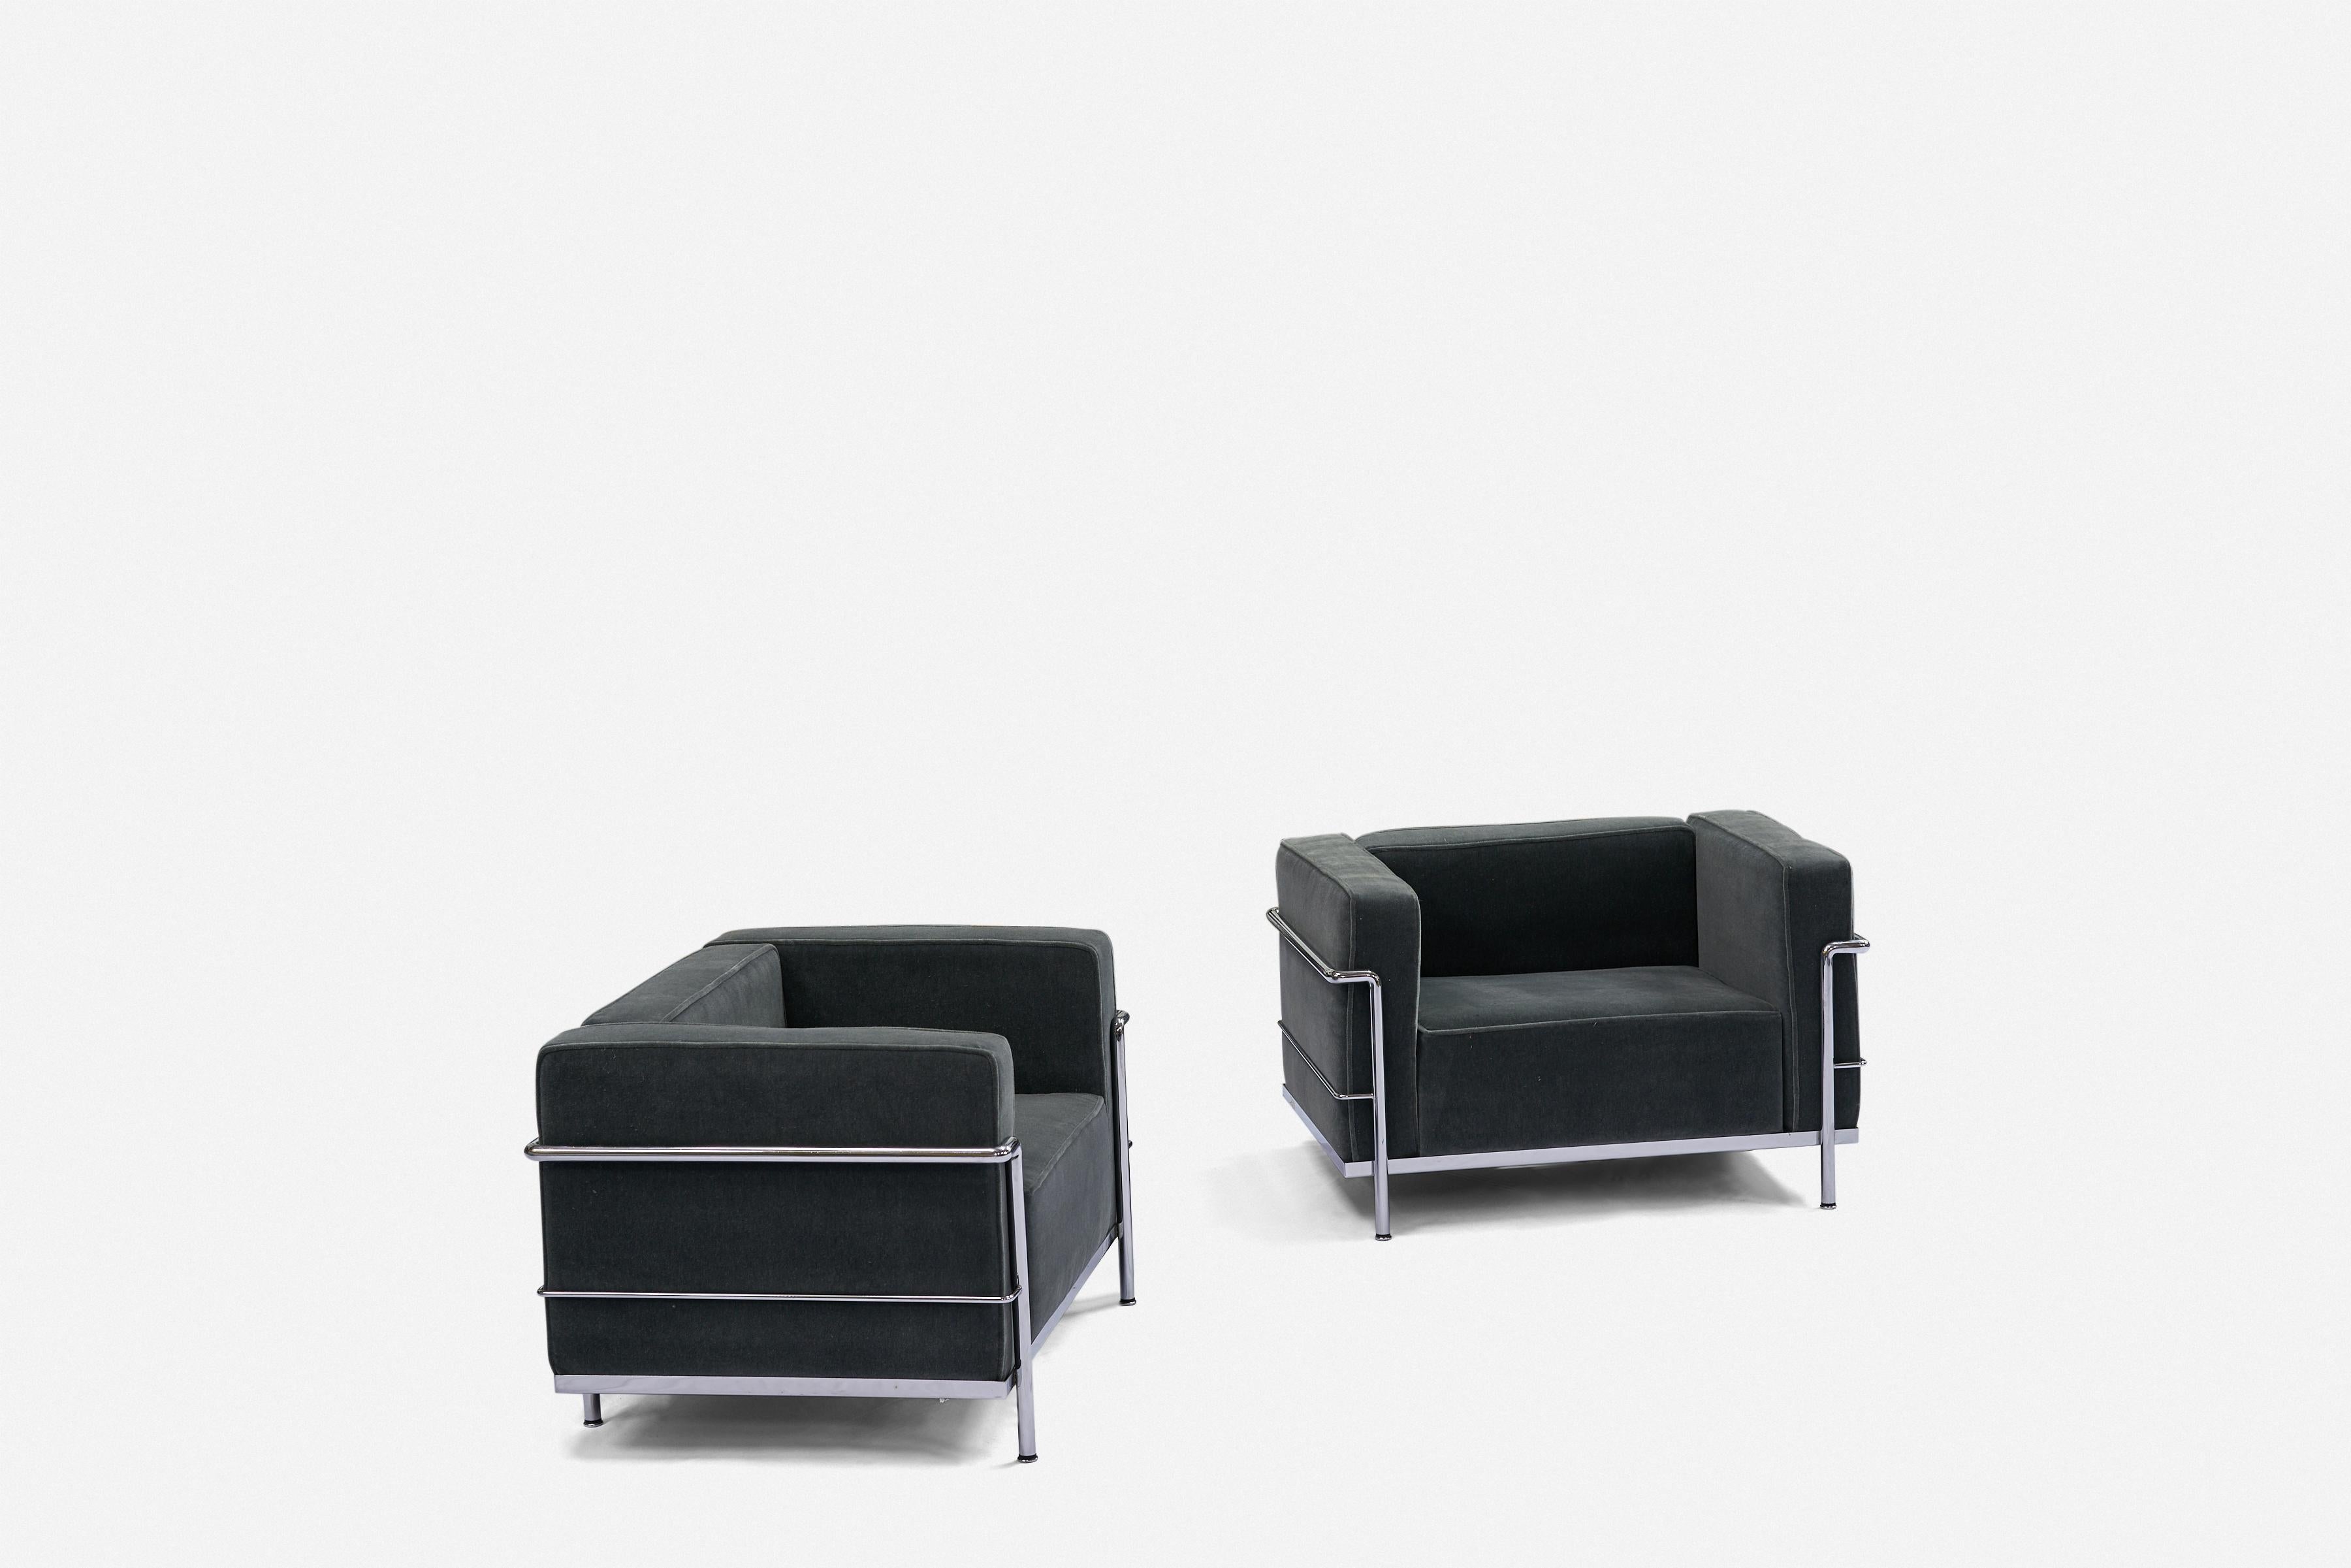 Charlotte Perriand, Pierre Jeanneret und Le Corbusier
LC3 Loungesessel
Cassina
Frankreich / Italien, 1928 / ca. 1995
Mohair, verchromter Stahl
24 h × 39 b × 29 t in